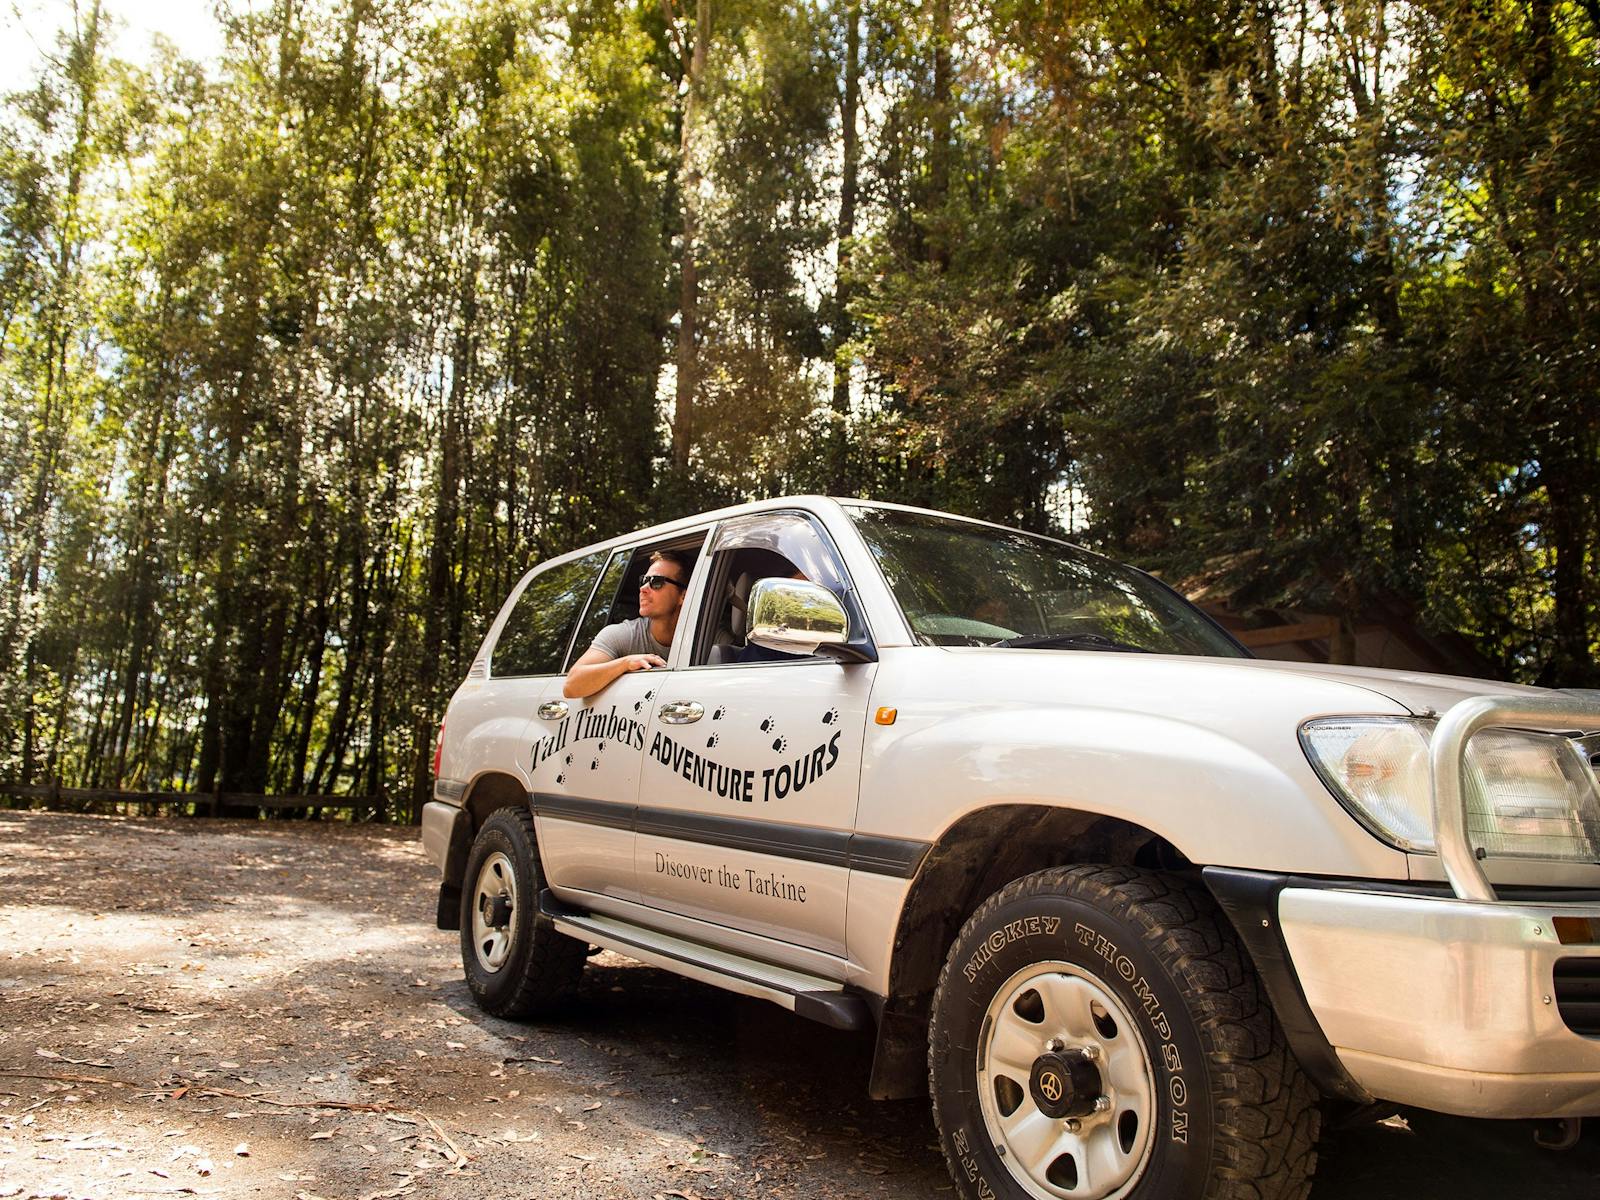 Tall Timbers Adventure Tours 4WD in the Tarkine rainforest with young man looking out of vehicle